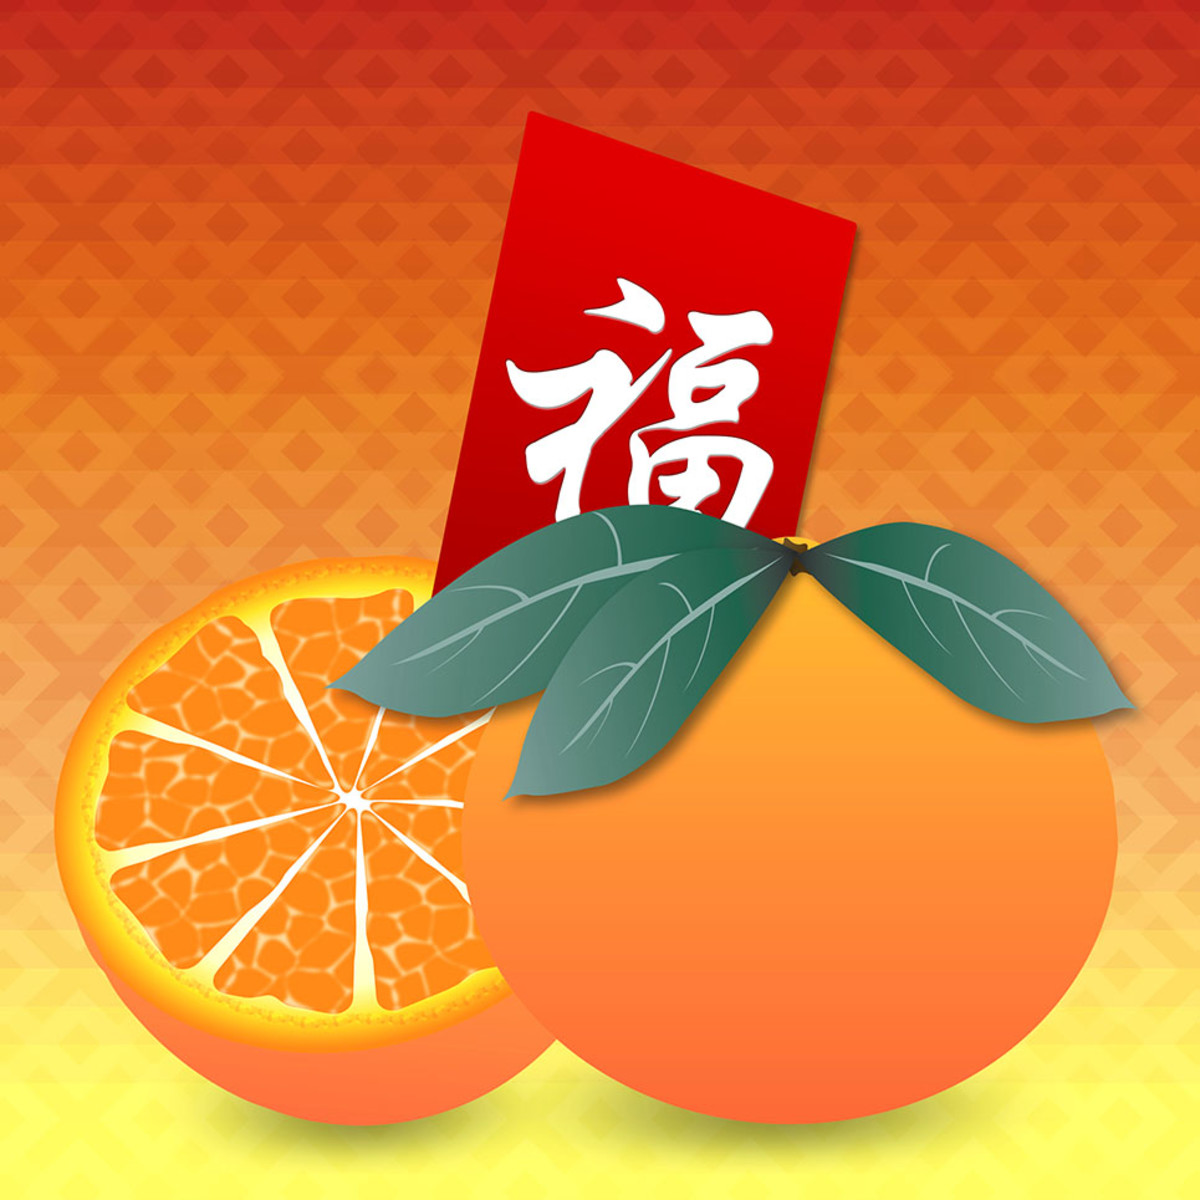 Mandarin oranges. The traditional must-have gift for Chinese New Year gatherings.